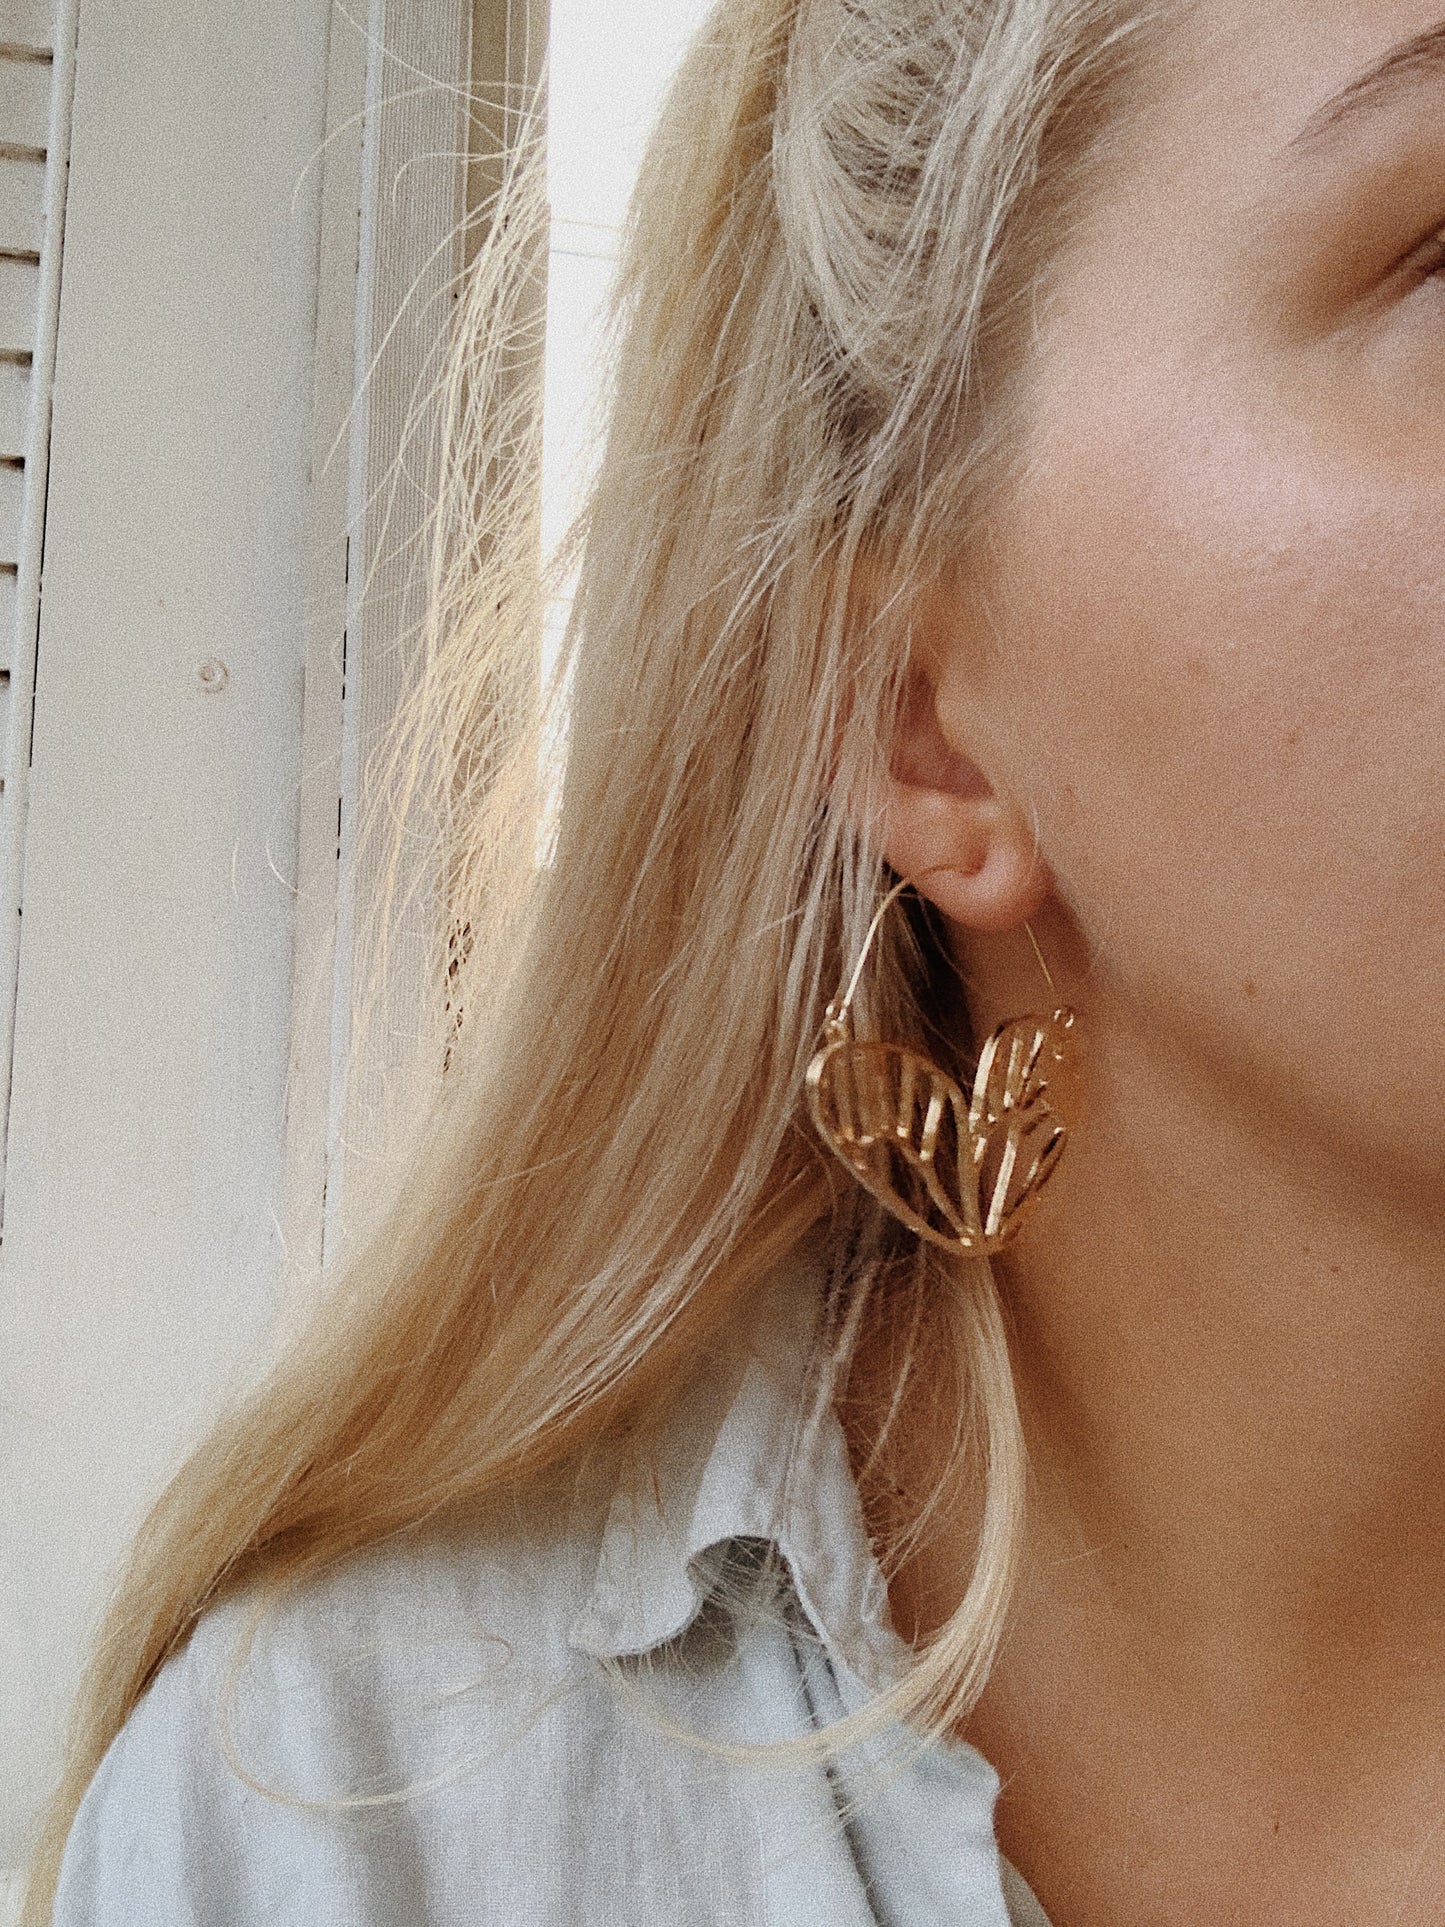 BUTTERFLY EFFECT GOLD INTRICATE Earrings | By: Life in the sun store